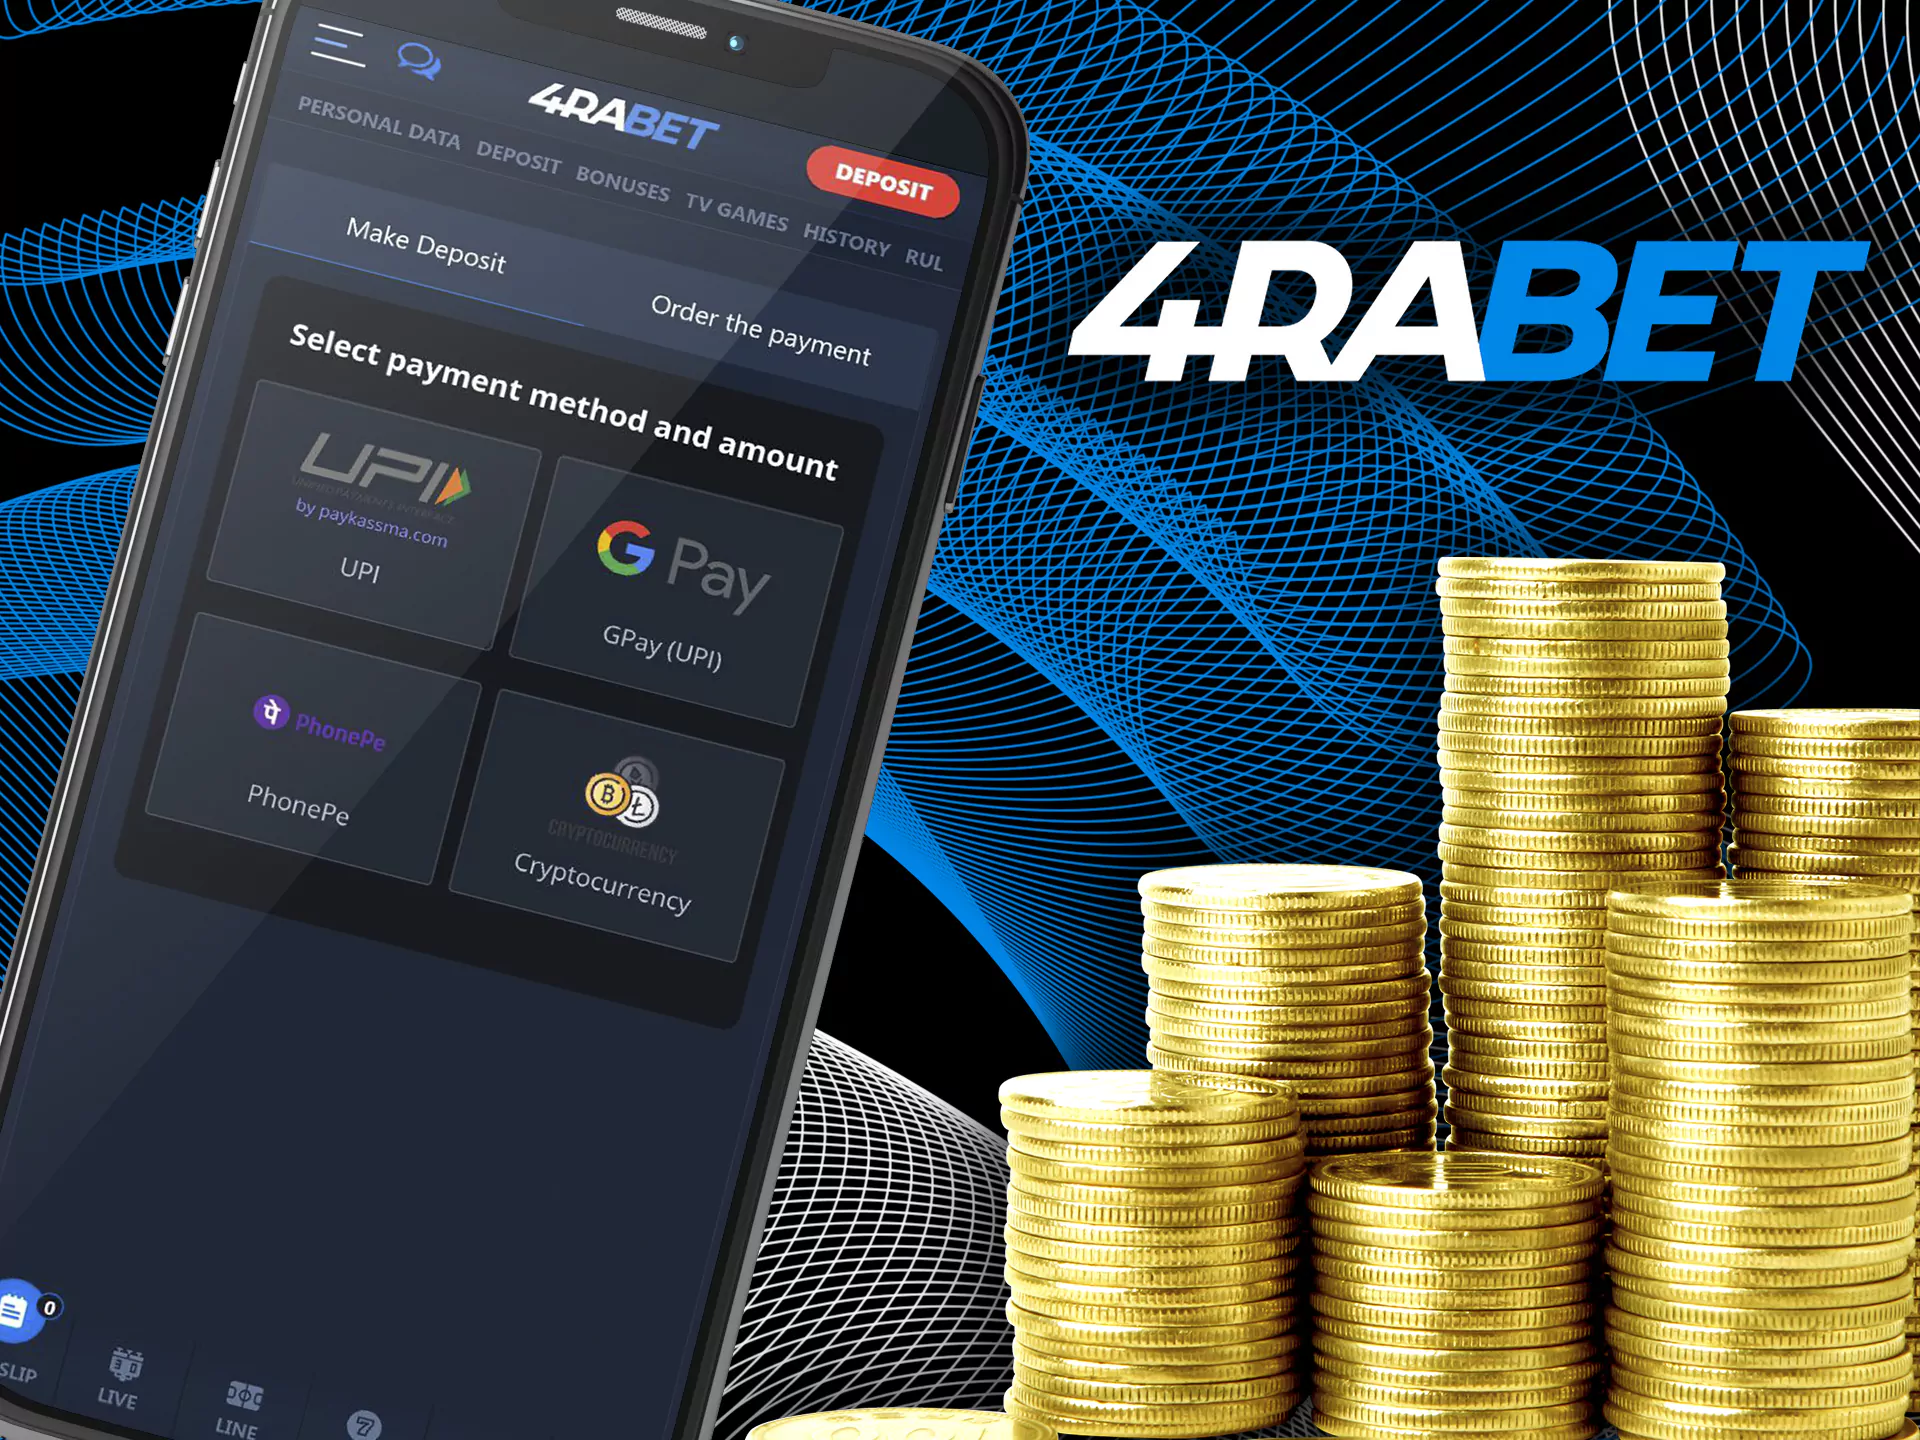 Make your first deposit in the 4rabet system.